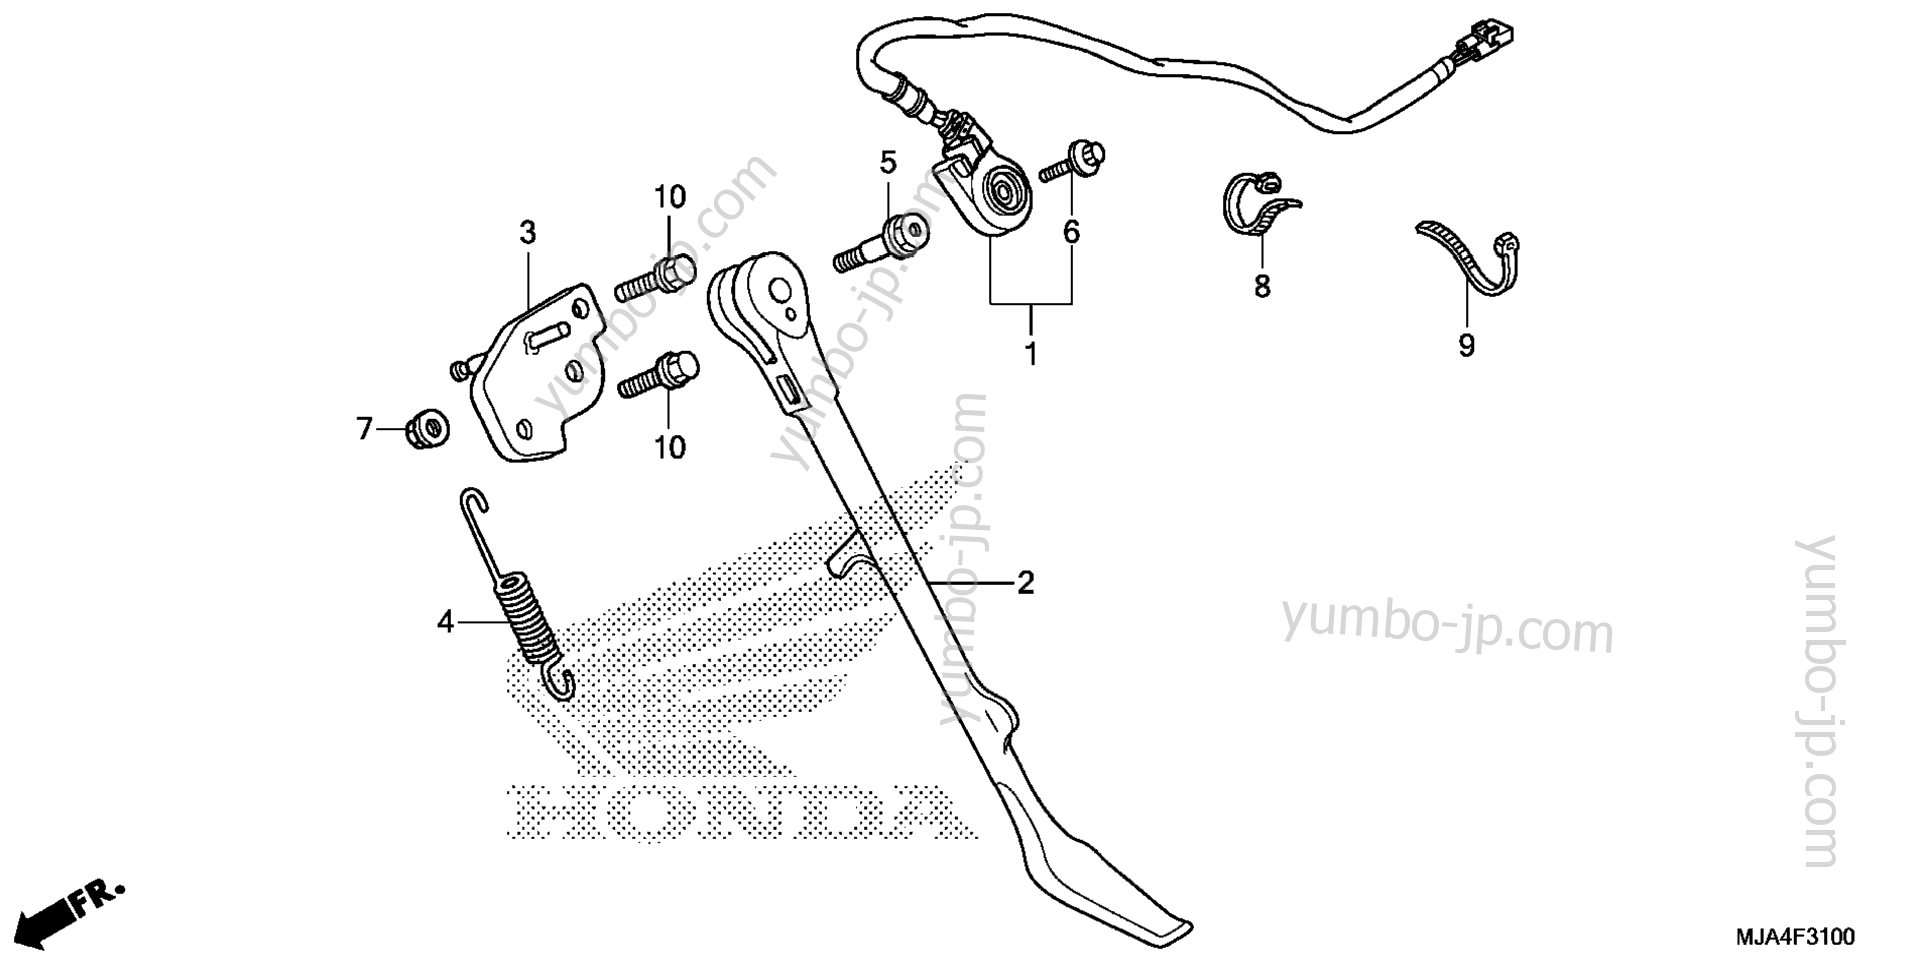 SIDE STAND (1) for motorcycles HONDA VT750C2F A 2012 year